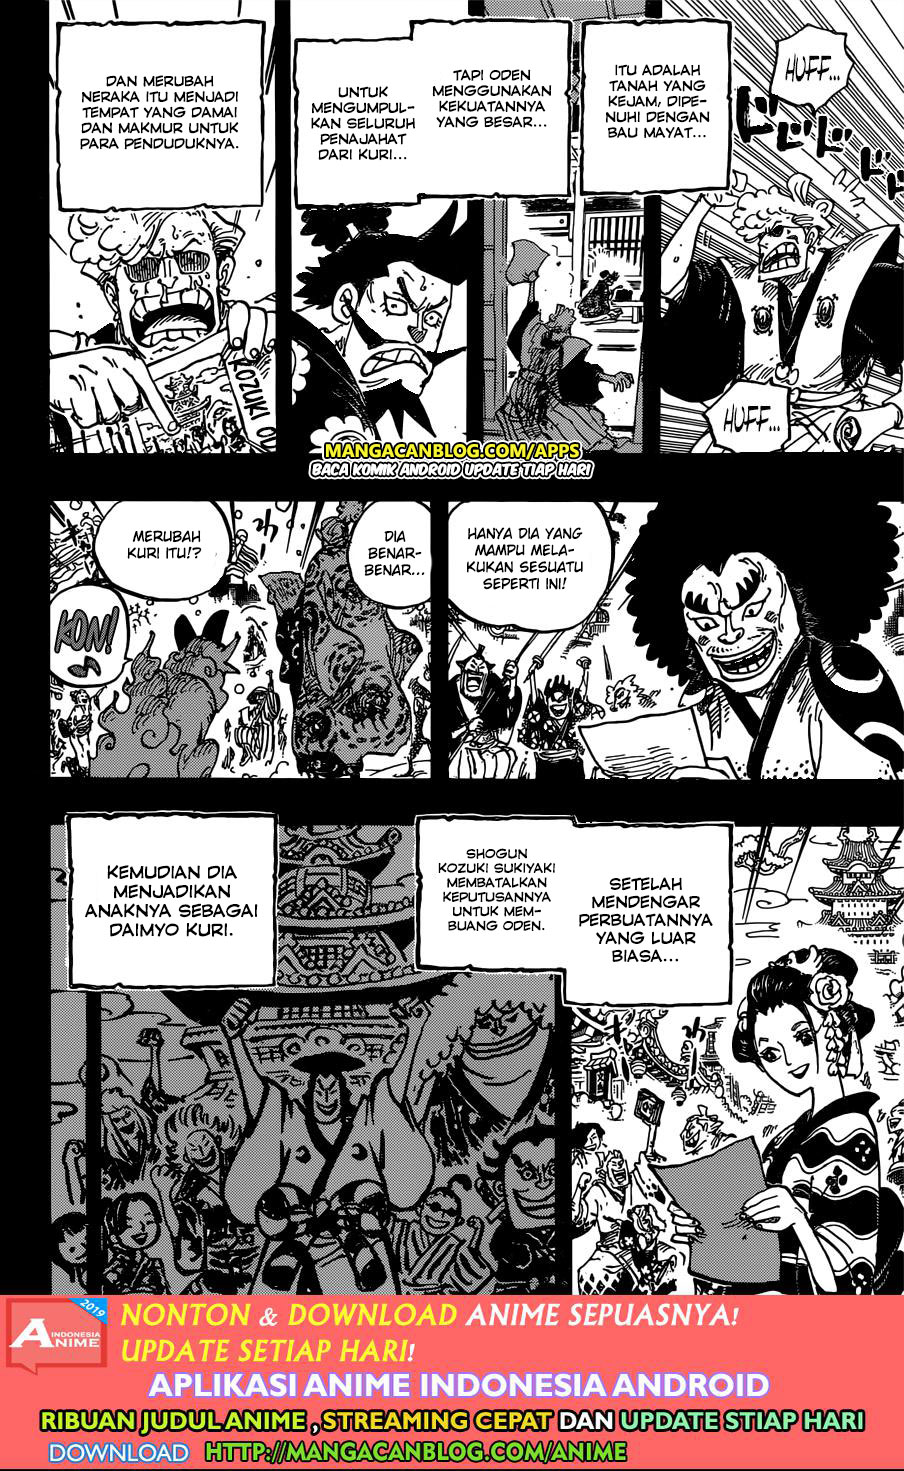 One Piece Chapter 962